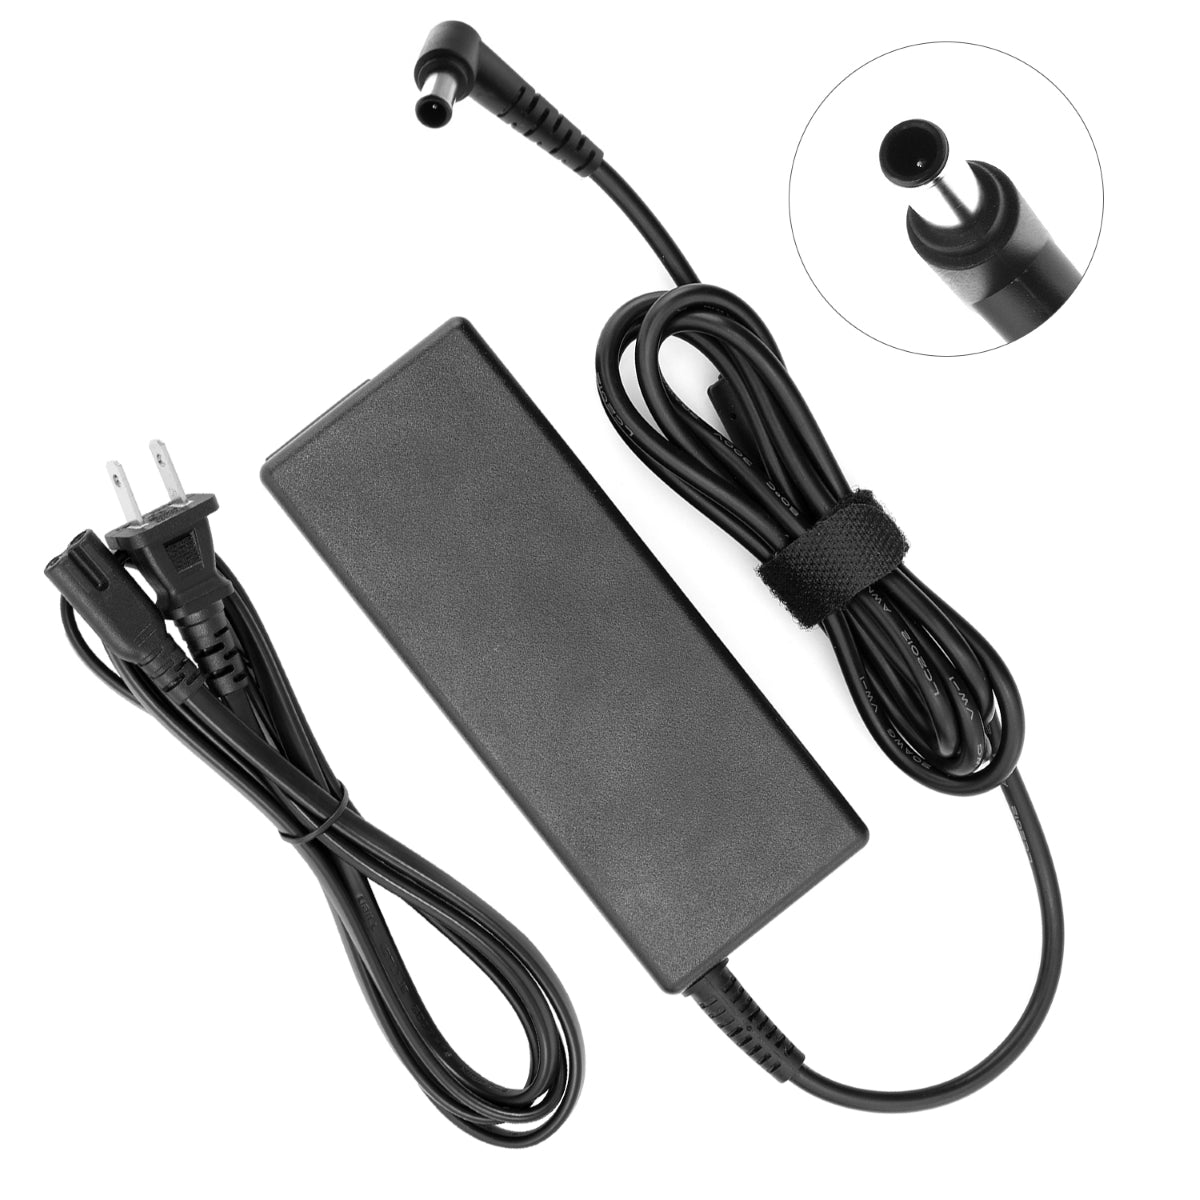 Power Adapter for LG 24LM520D-WU Monitor TV